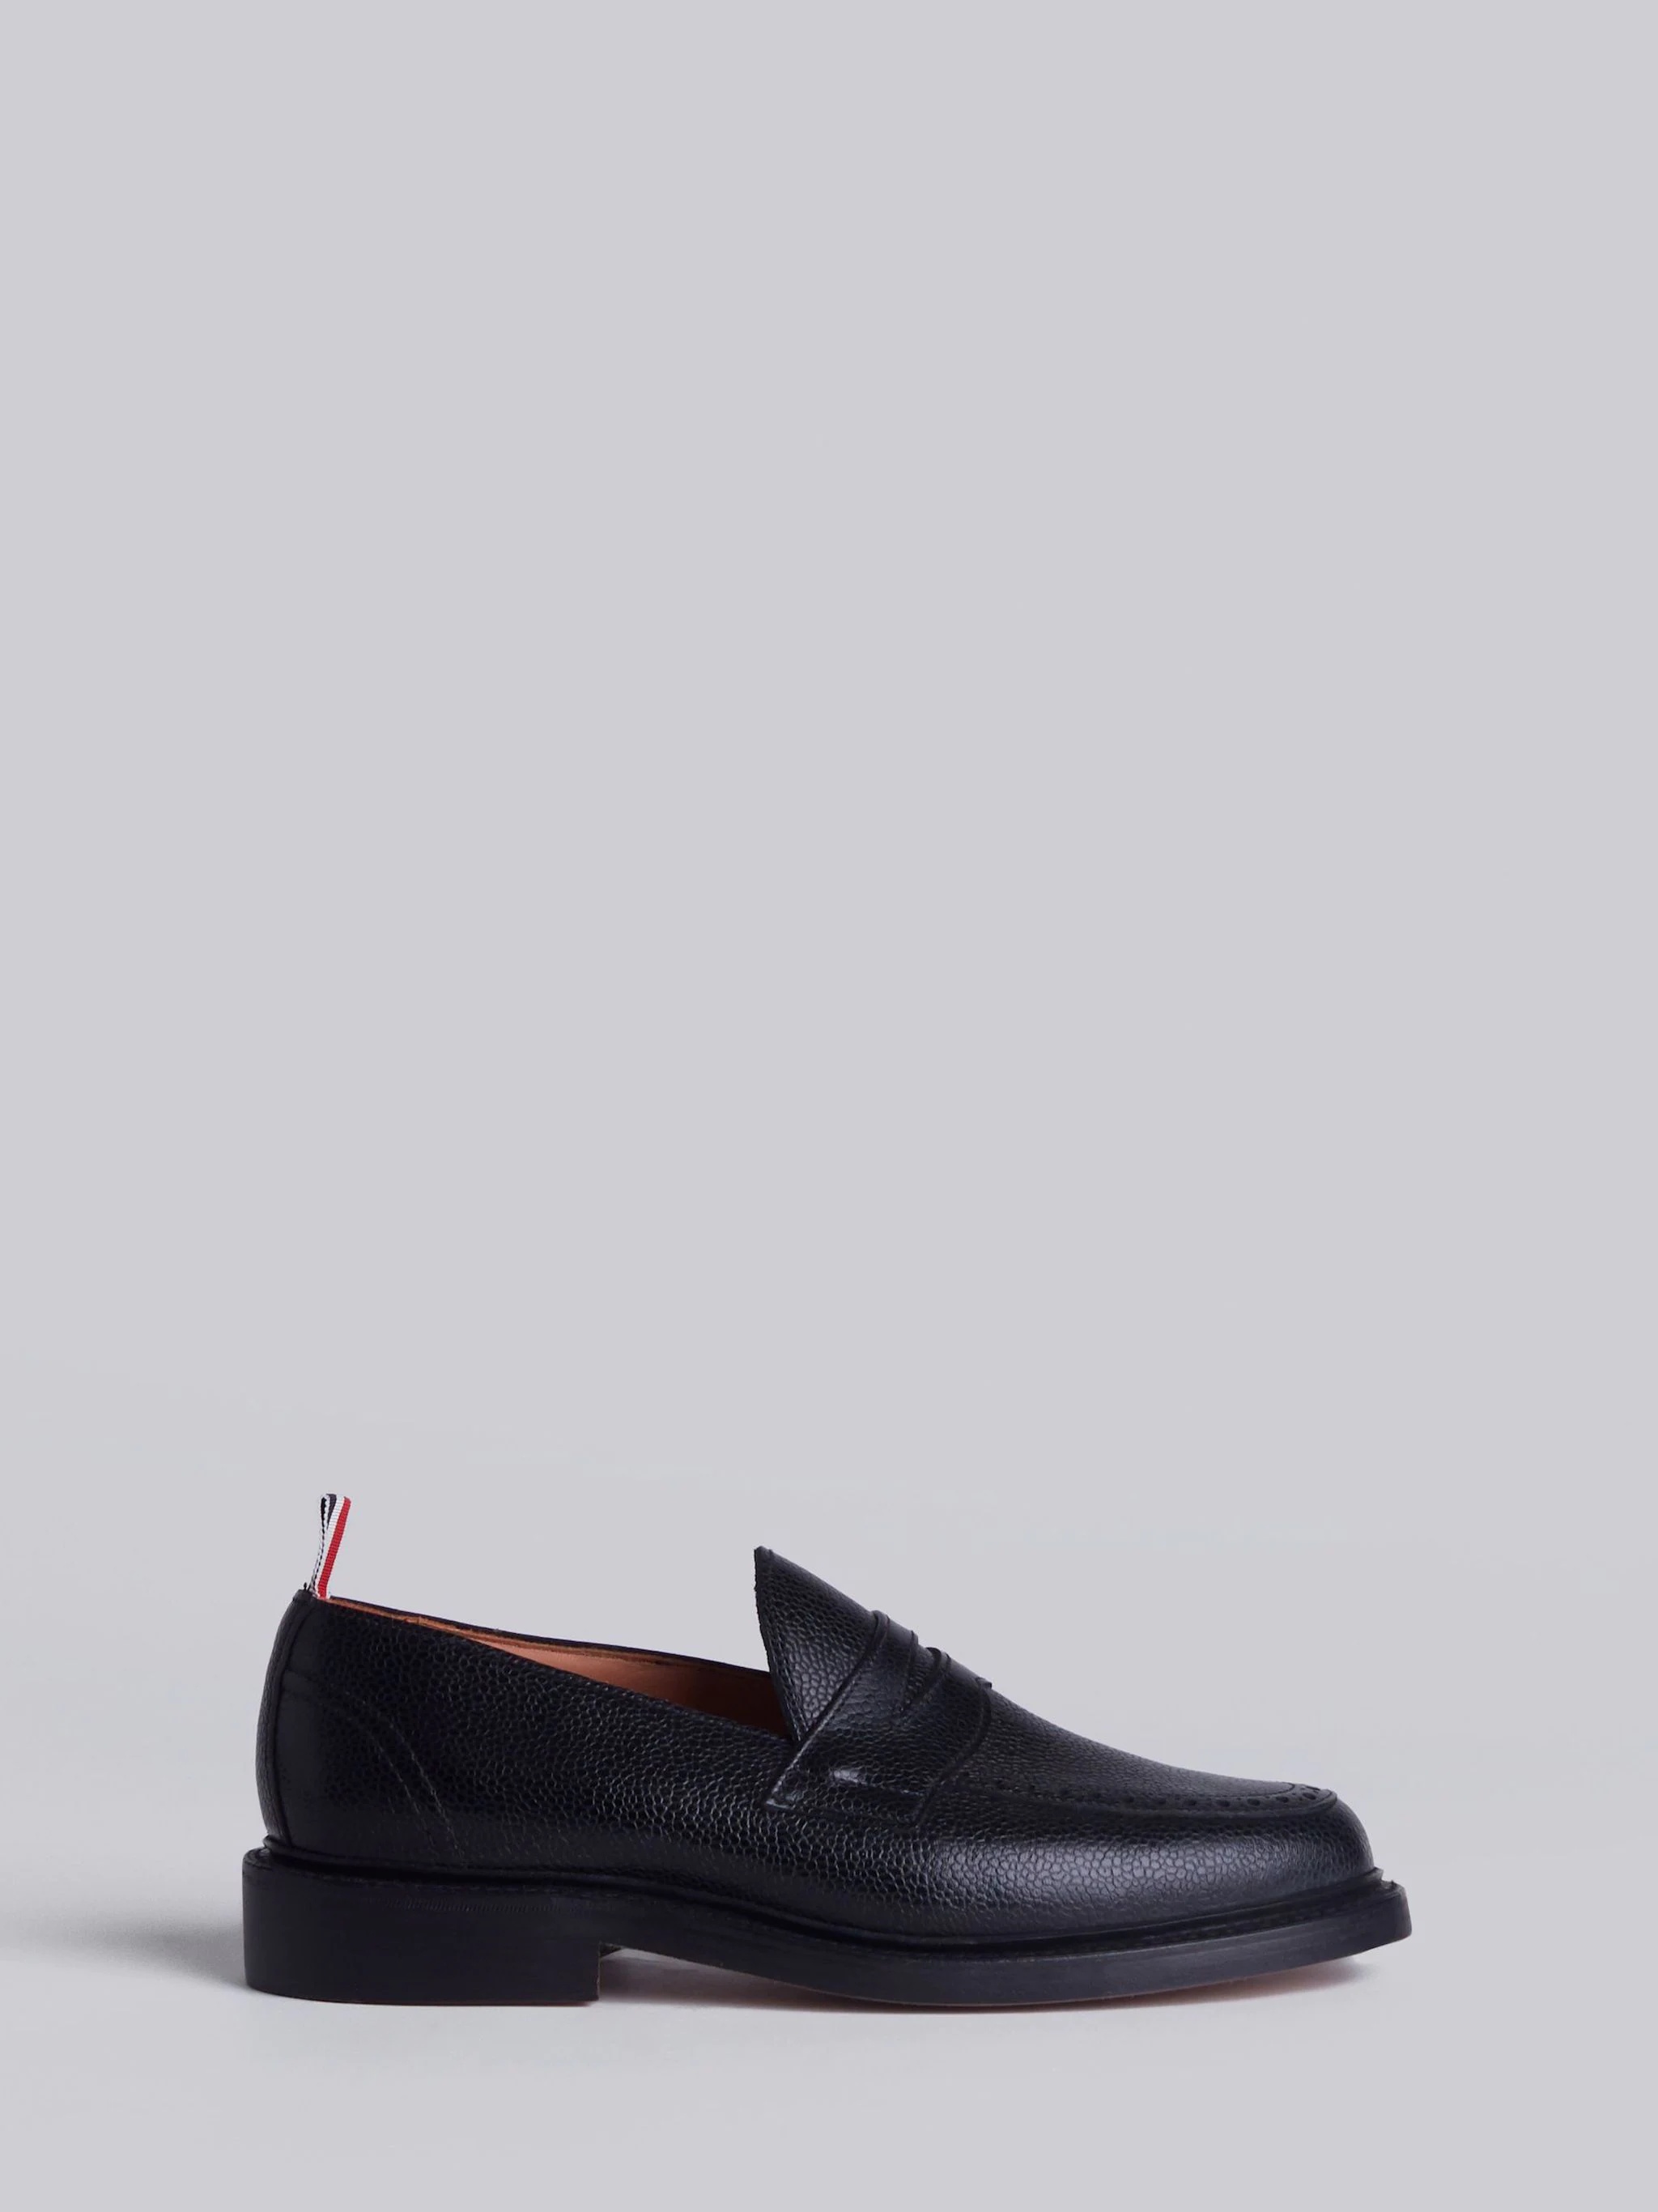 Penny Loafer With Leather Sole In Black Pebble Grain - 1